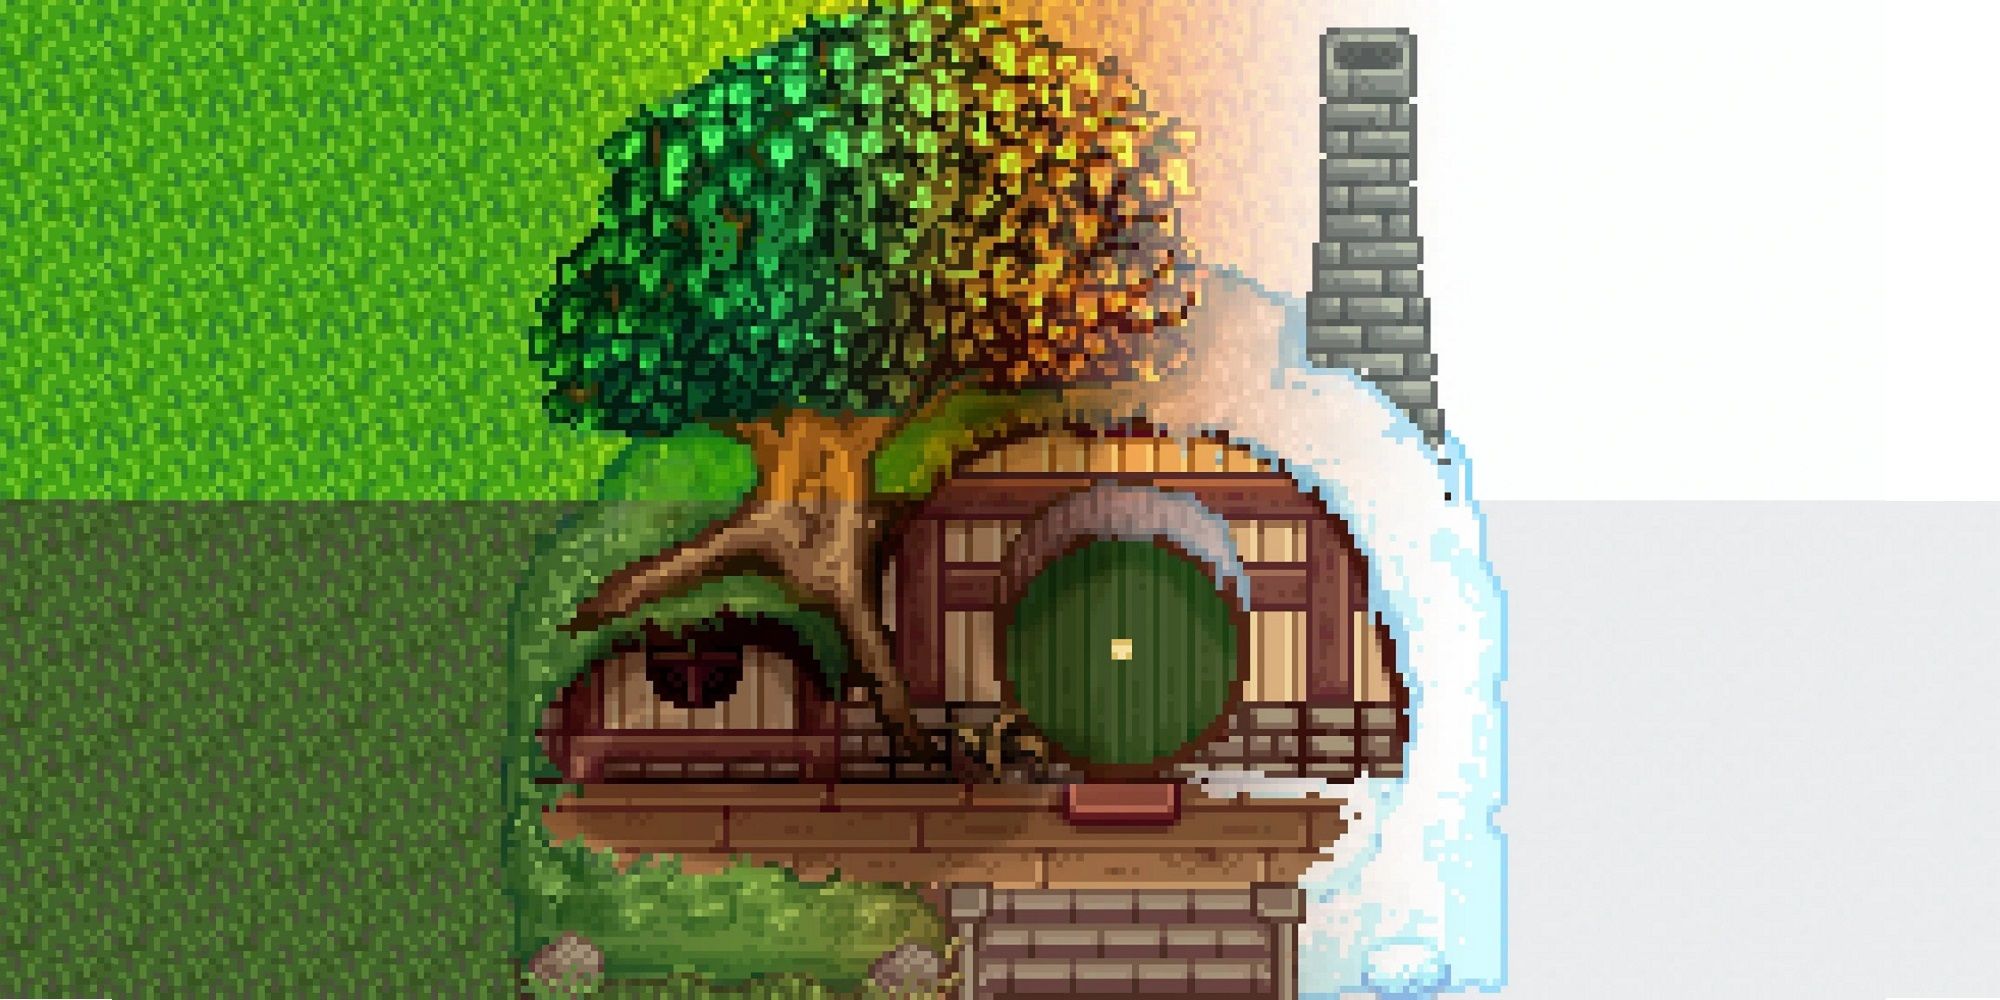 stardew valley hobbit hole mod showing a hobbit hole in all seasons